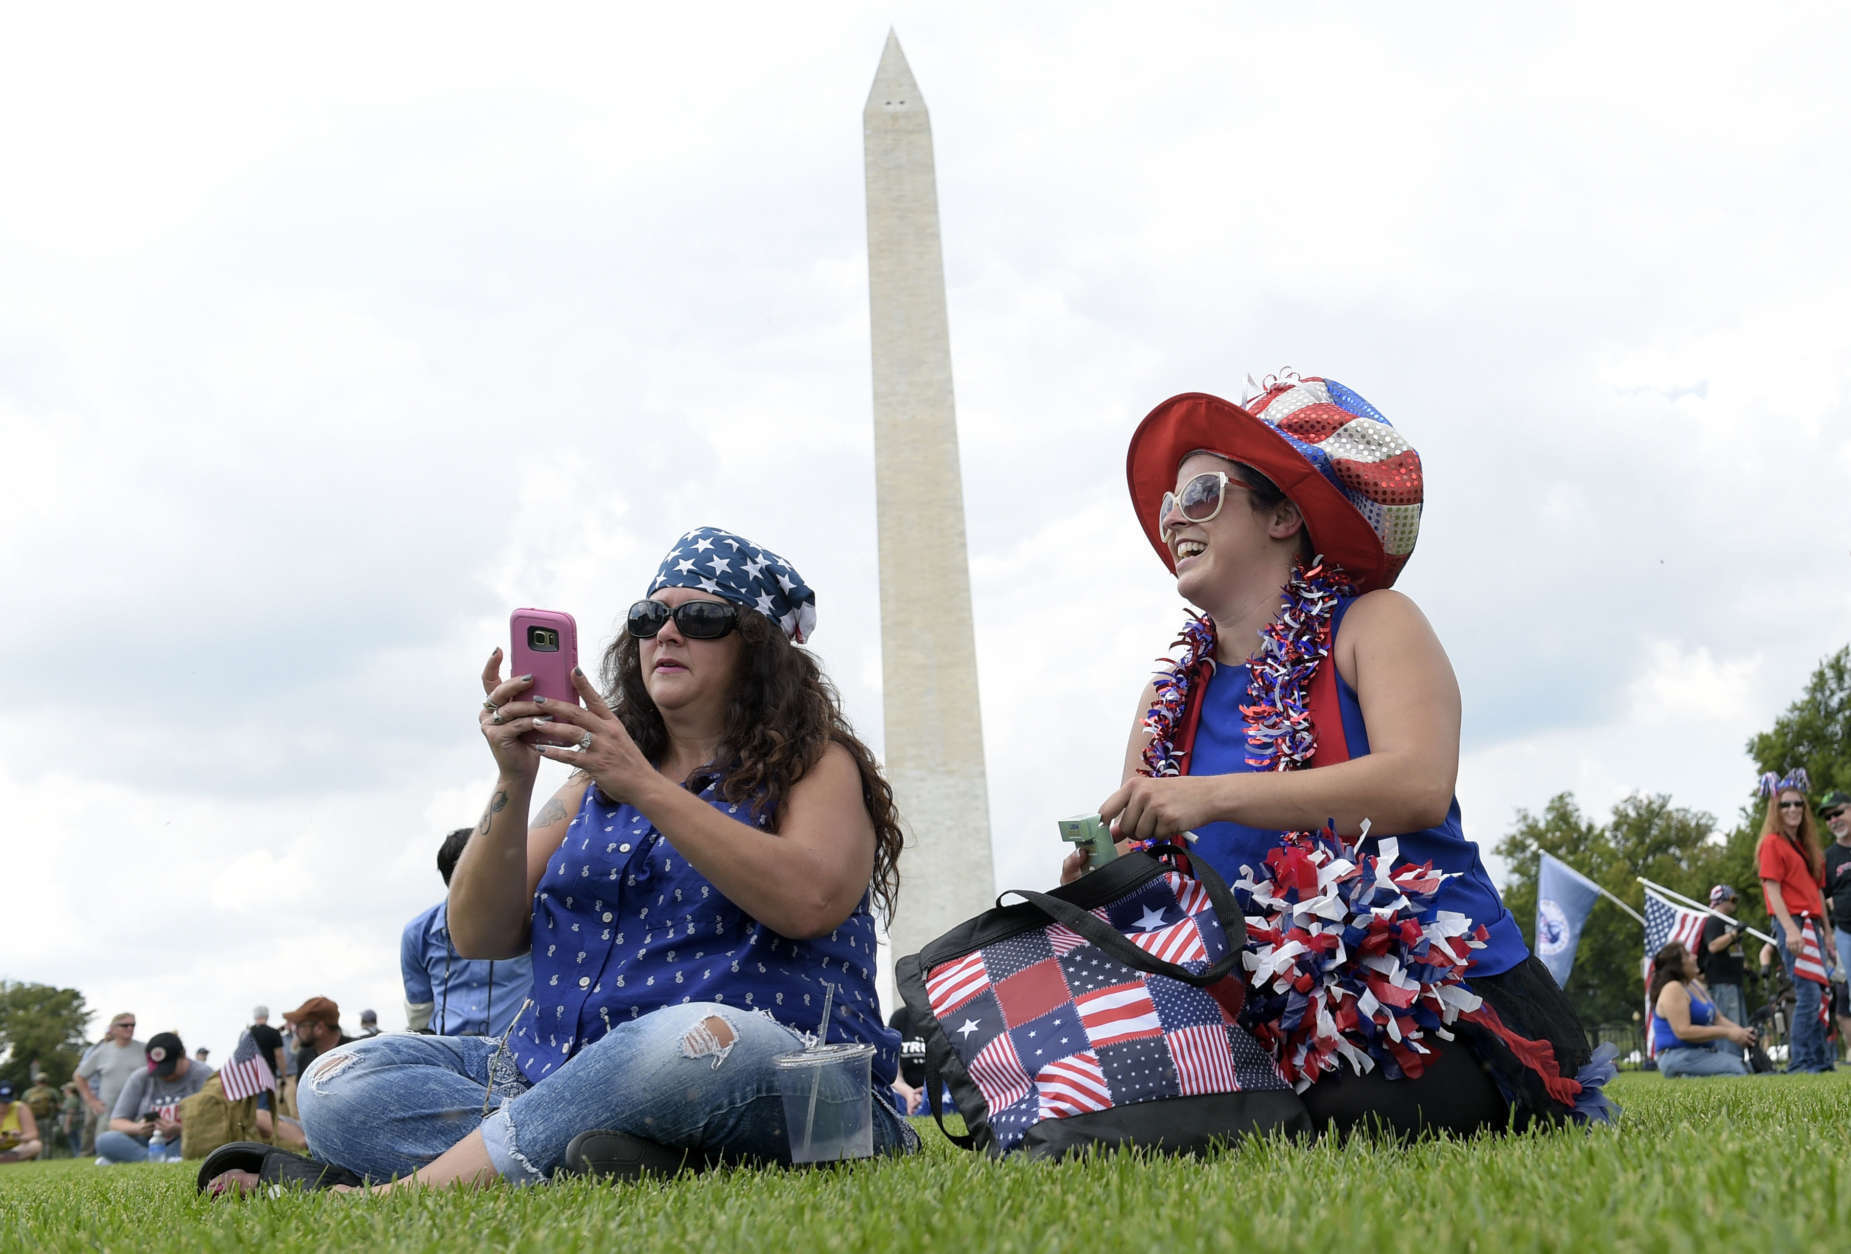 Sheri Swick, left, of Le Vale, Md., and her daughter Angel Schultz, right, of Cumberland, Md., sits on the National Mall in Washington, Saturday, Sept. 16, 2017, as they attend a rally in support of President Donald Trump in what organizers are calling 'The Mother of All Rallies." (AP Photo/Susan Walsh)